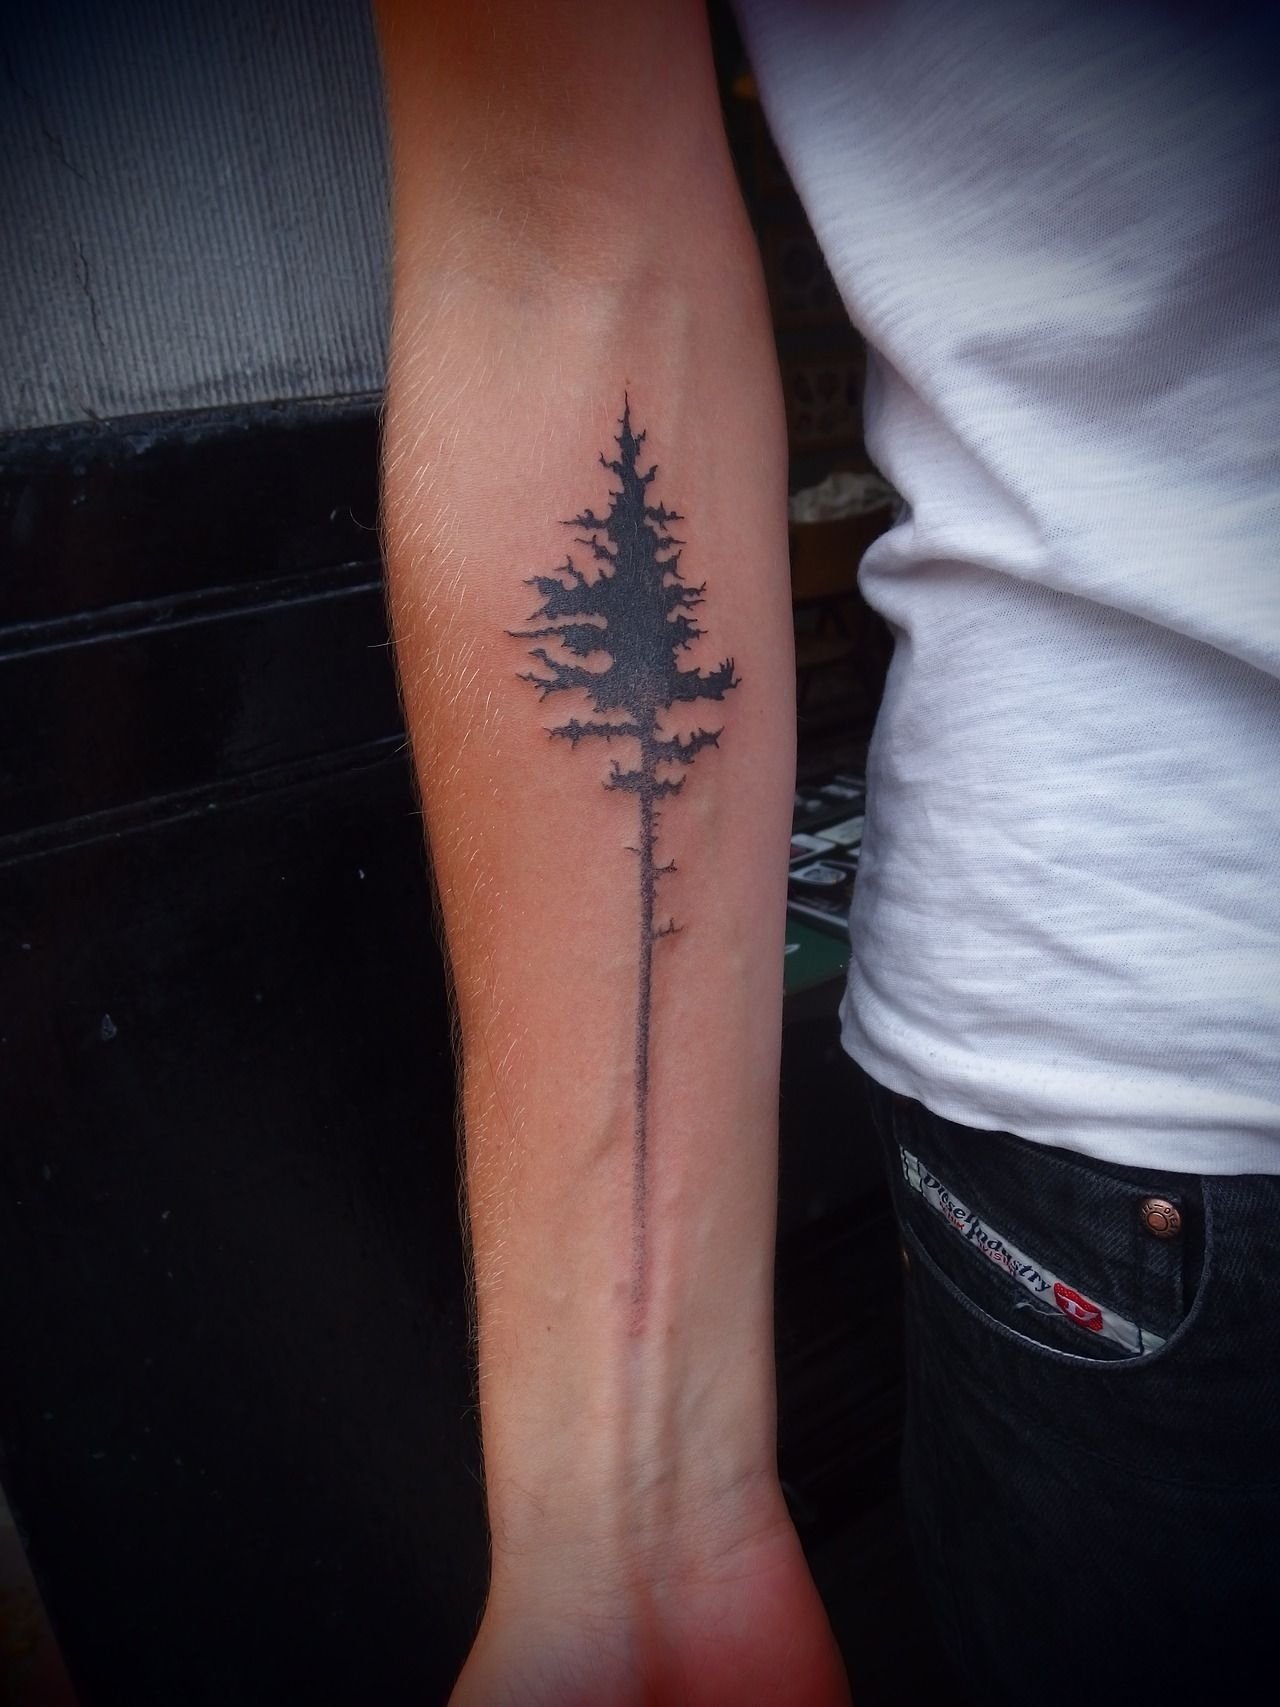 10 Attractive Simple Tattoo Ideas For Guys 30 tattoo designs for your scars pine tree tattoo pine tree and pine 2022